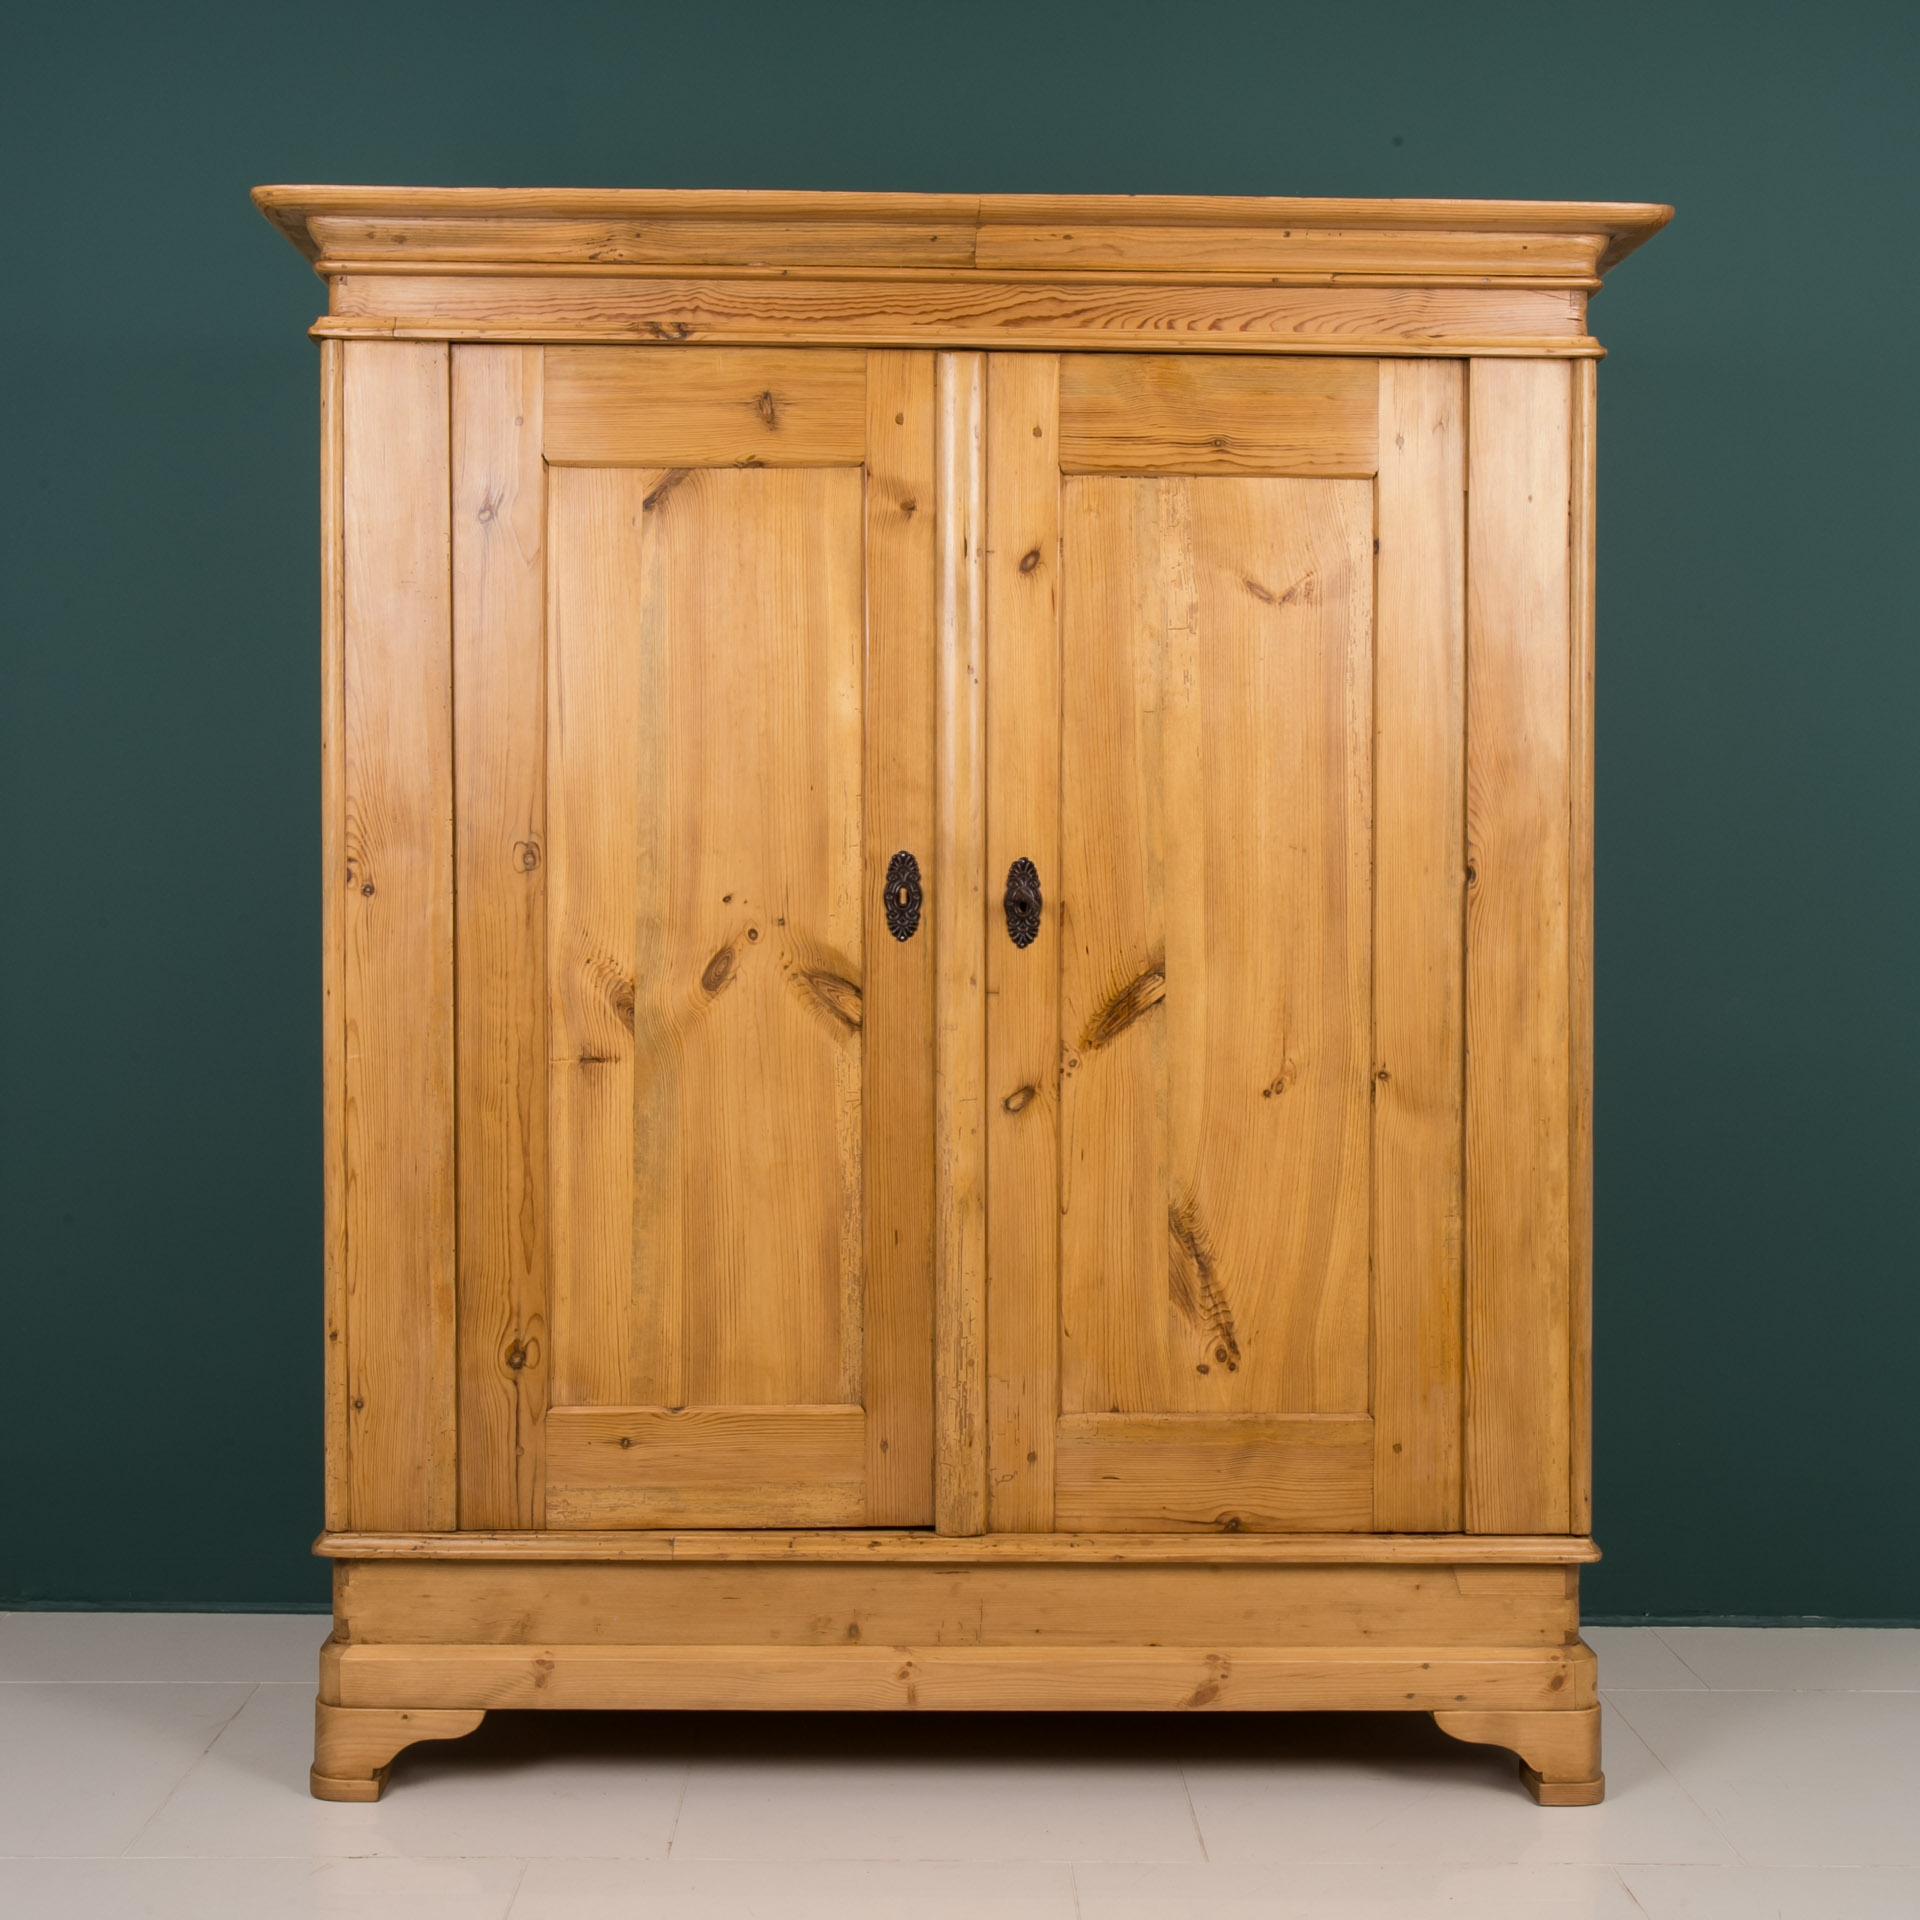 This Biedermeier wardrobe was made in Germany in first half of 19th century. The piece is made of pine wood. It has been carefully renovated and finished with high quality wood wax. The wardrobe can be easily unfolded thanks to original construction